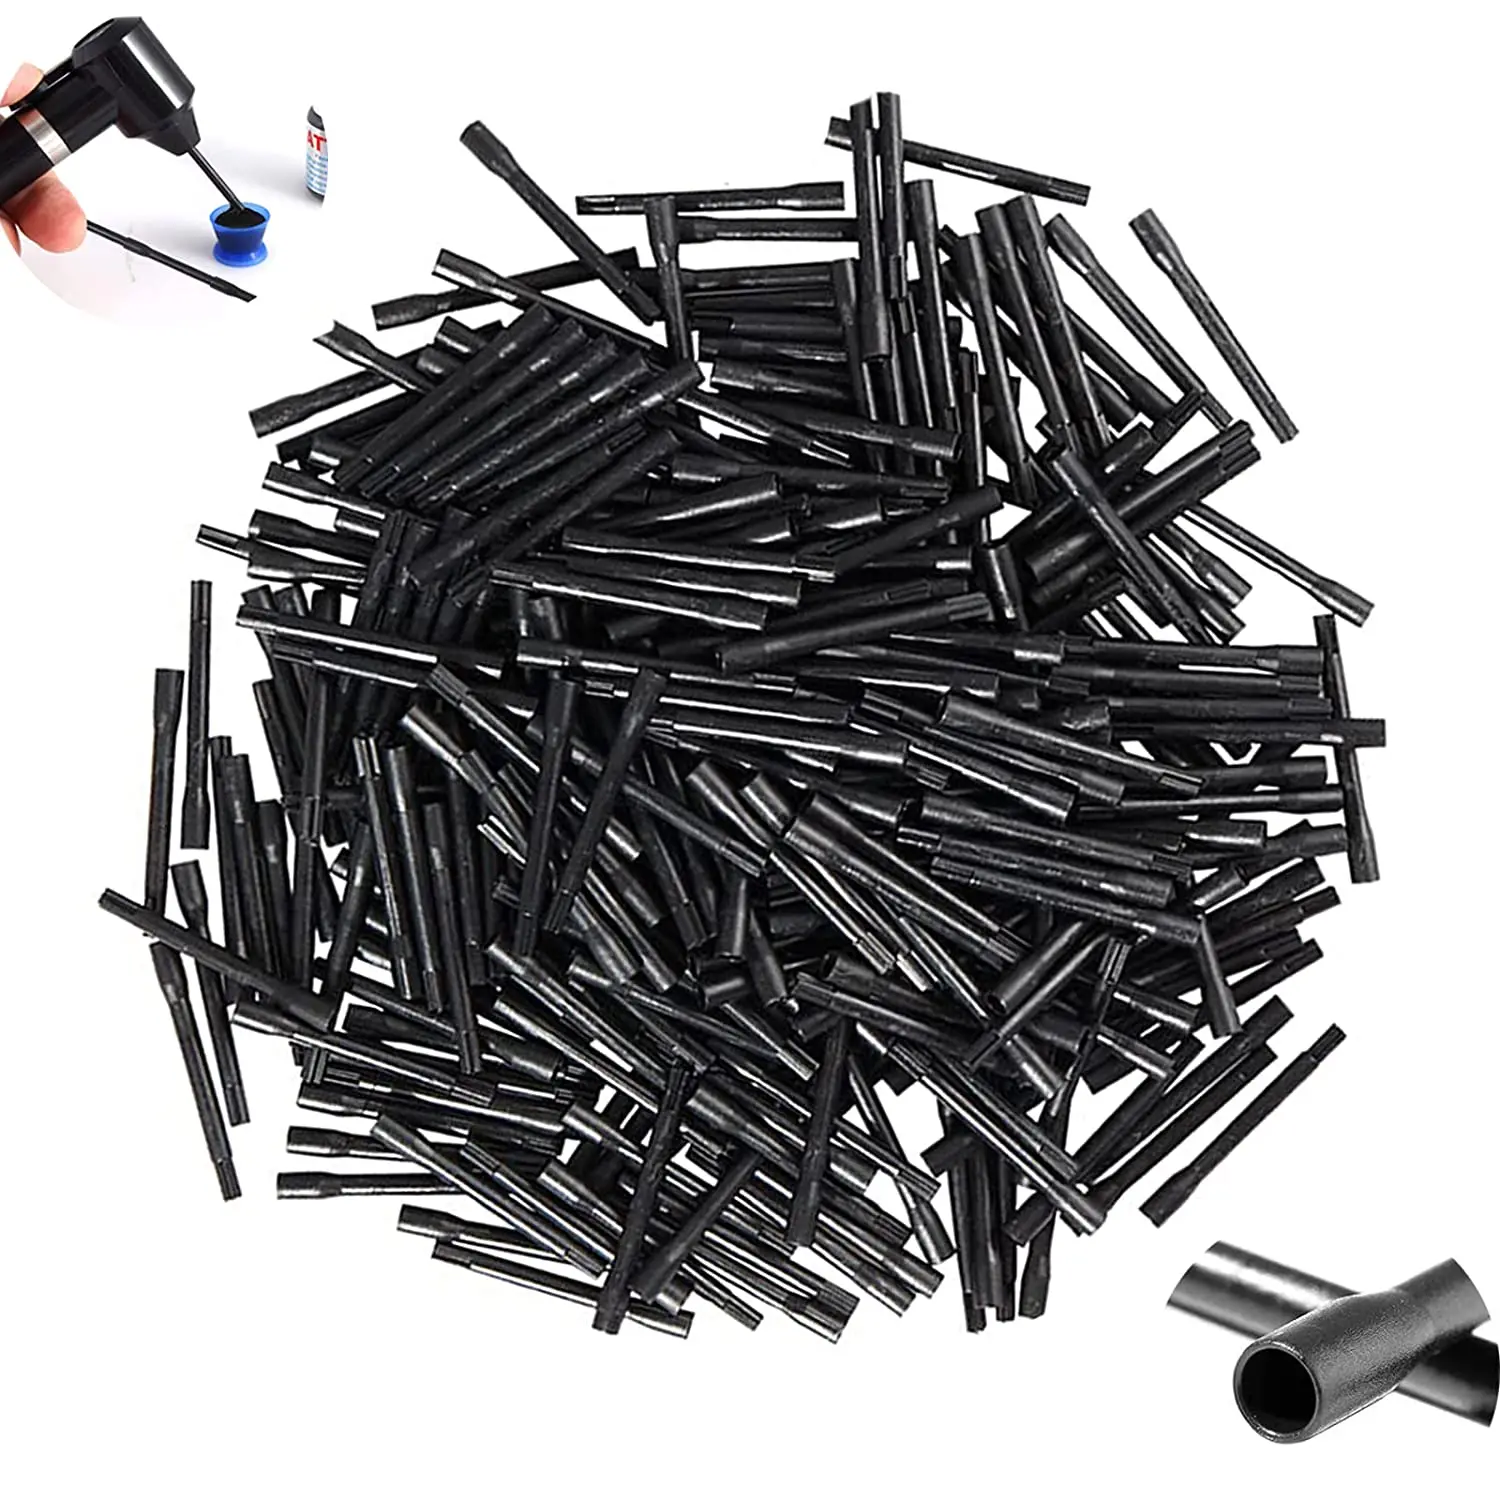 100Pcs Tattoo Ink Mixer Sticks Tattoo Pigment Mixing Sticks Plastic Stirring Rods Makeup Eyebrow Microblading Tool for Tattoo 12 pcs palette knife painting tools color stirring spatulas drawing wood tray canvas plastic pallet